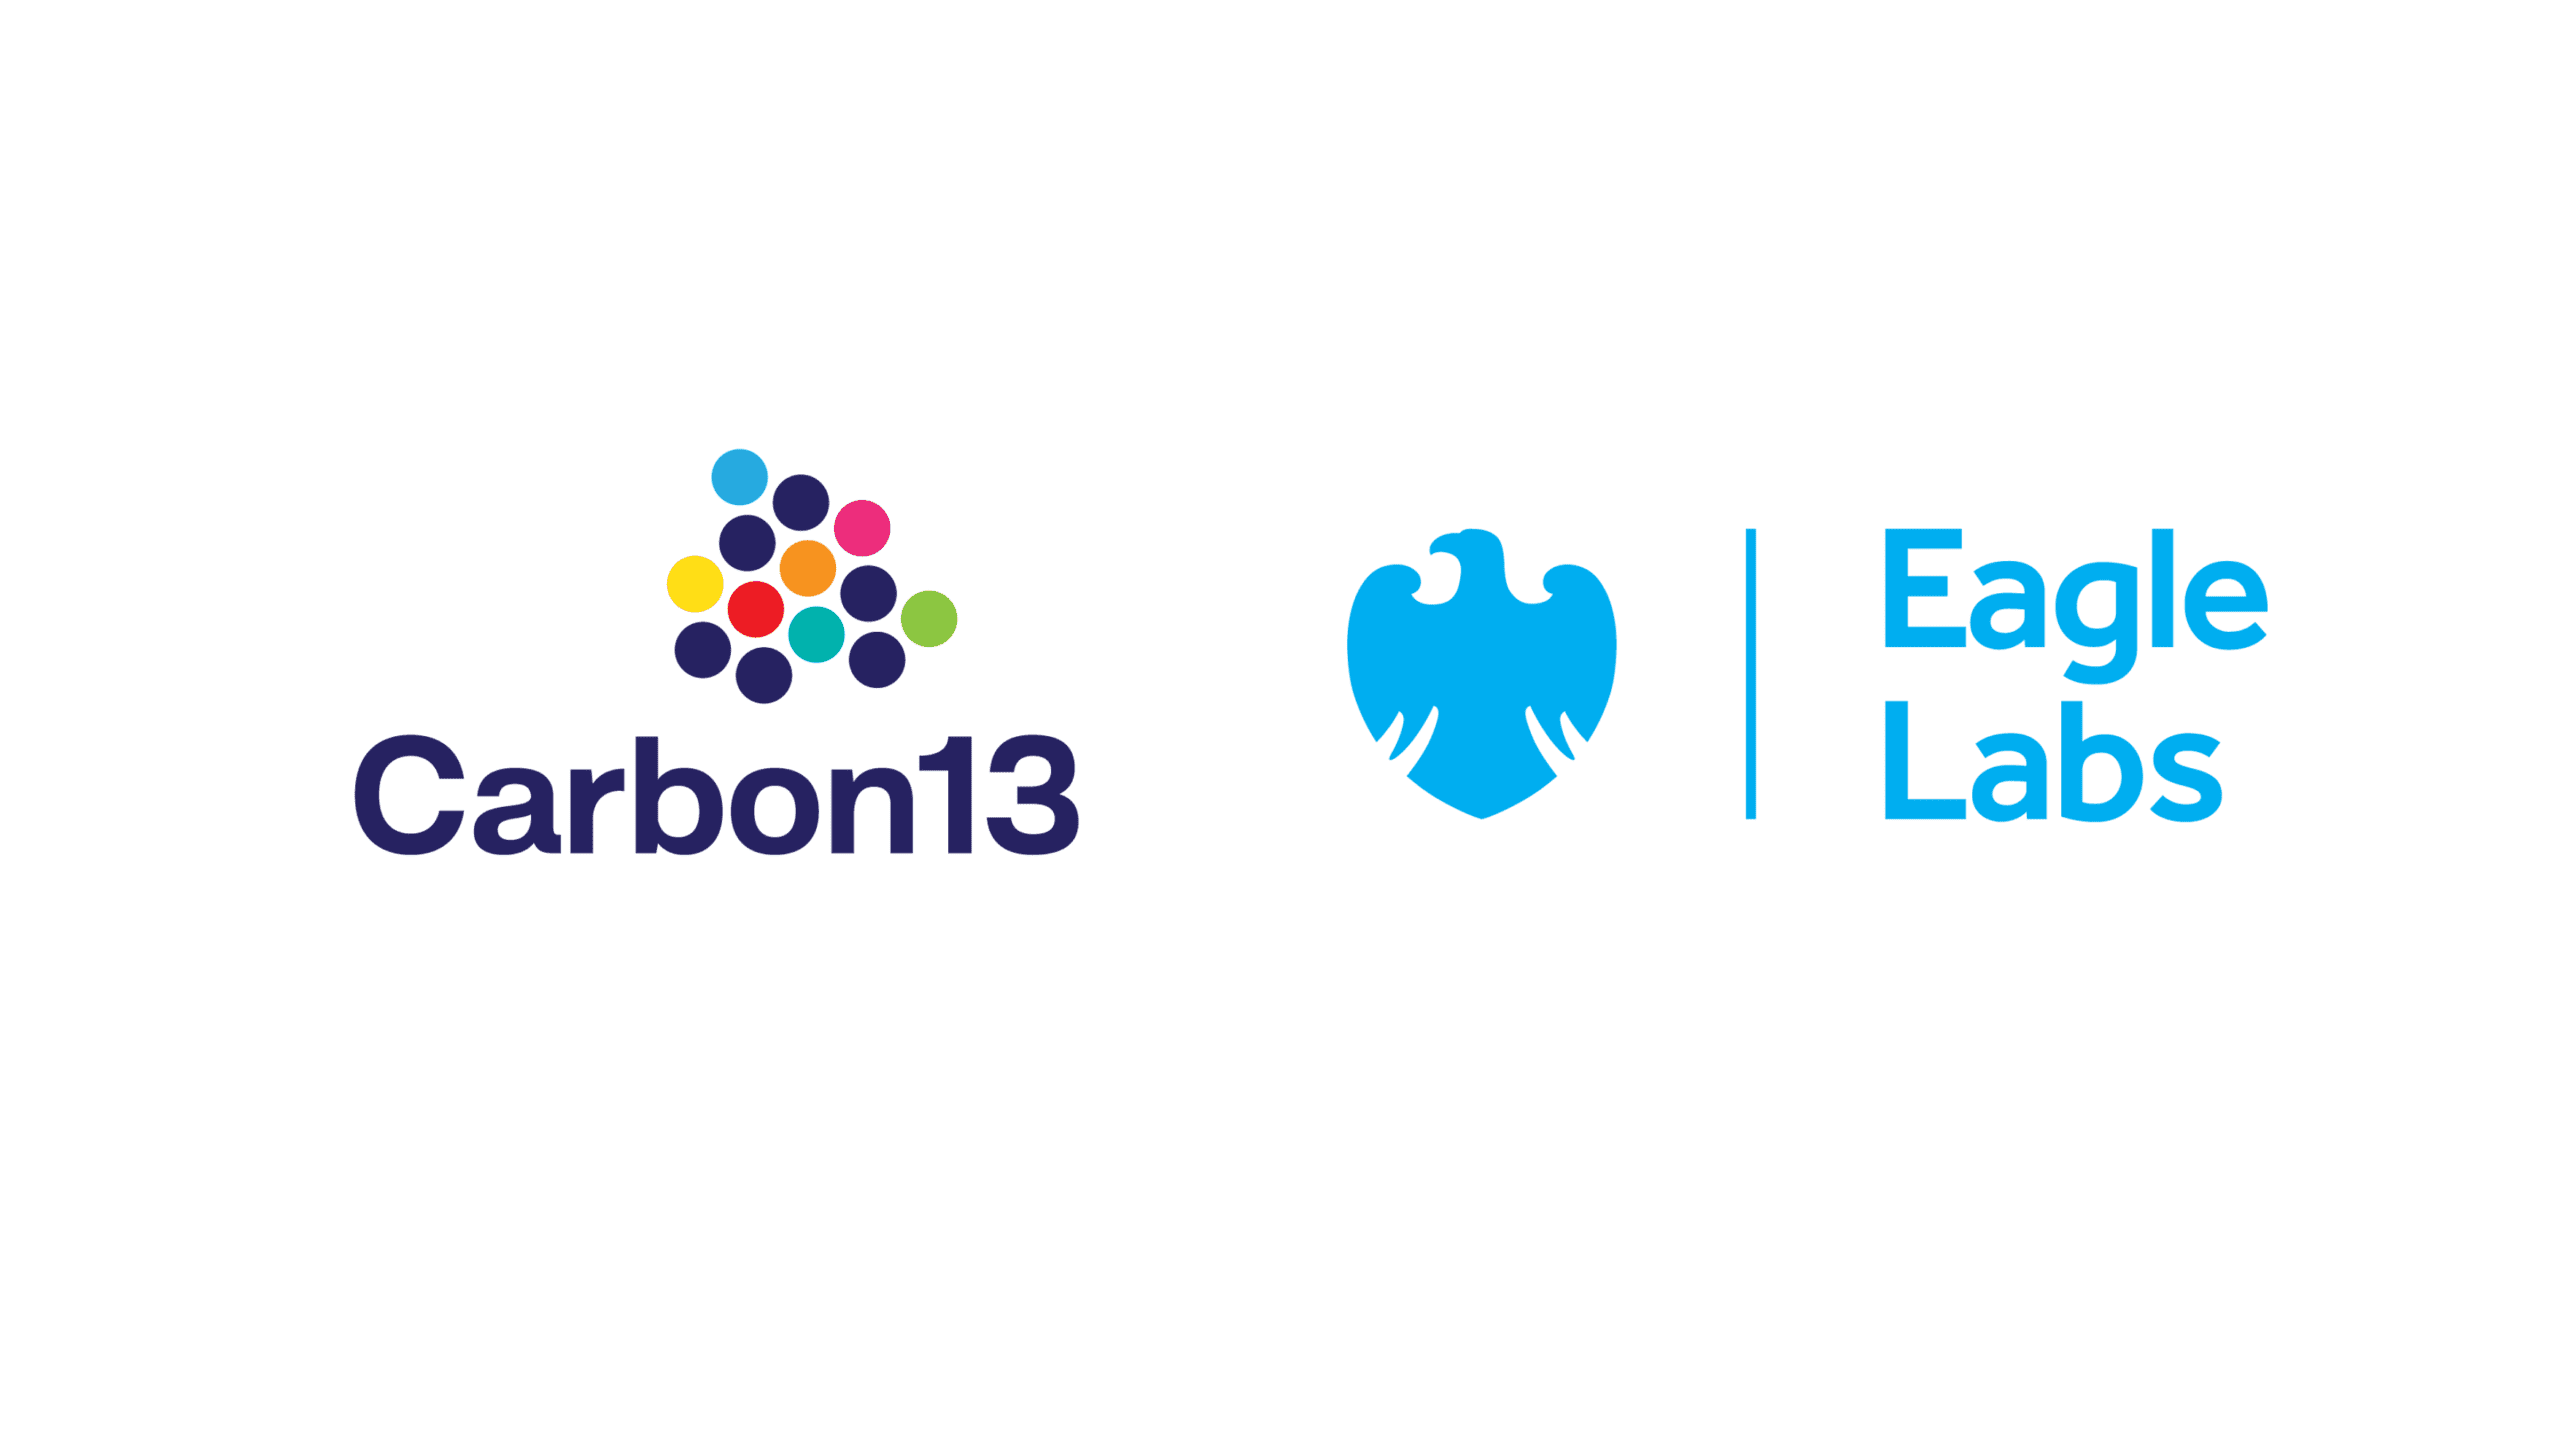 Barclays Eagle Labs and Carbon13 logo